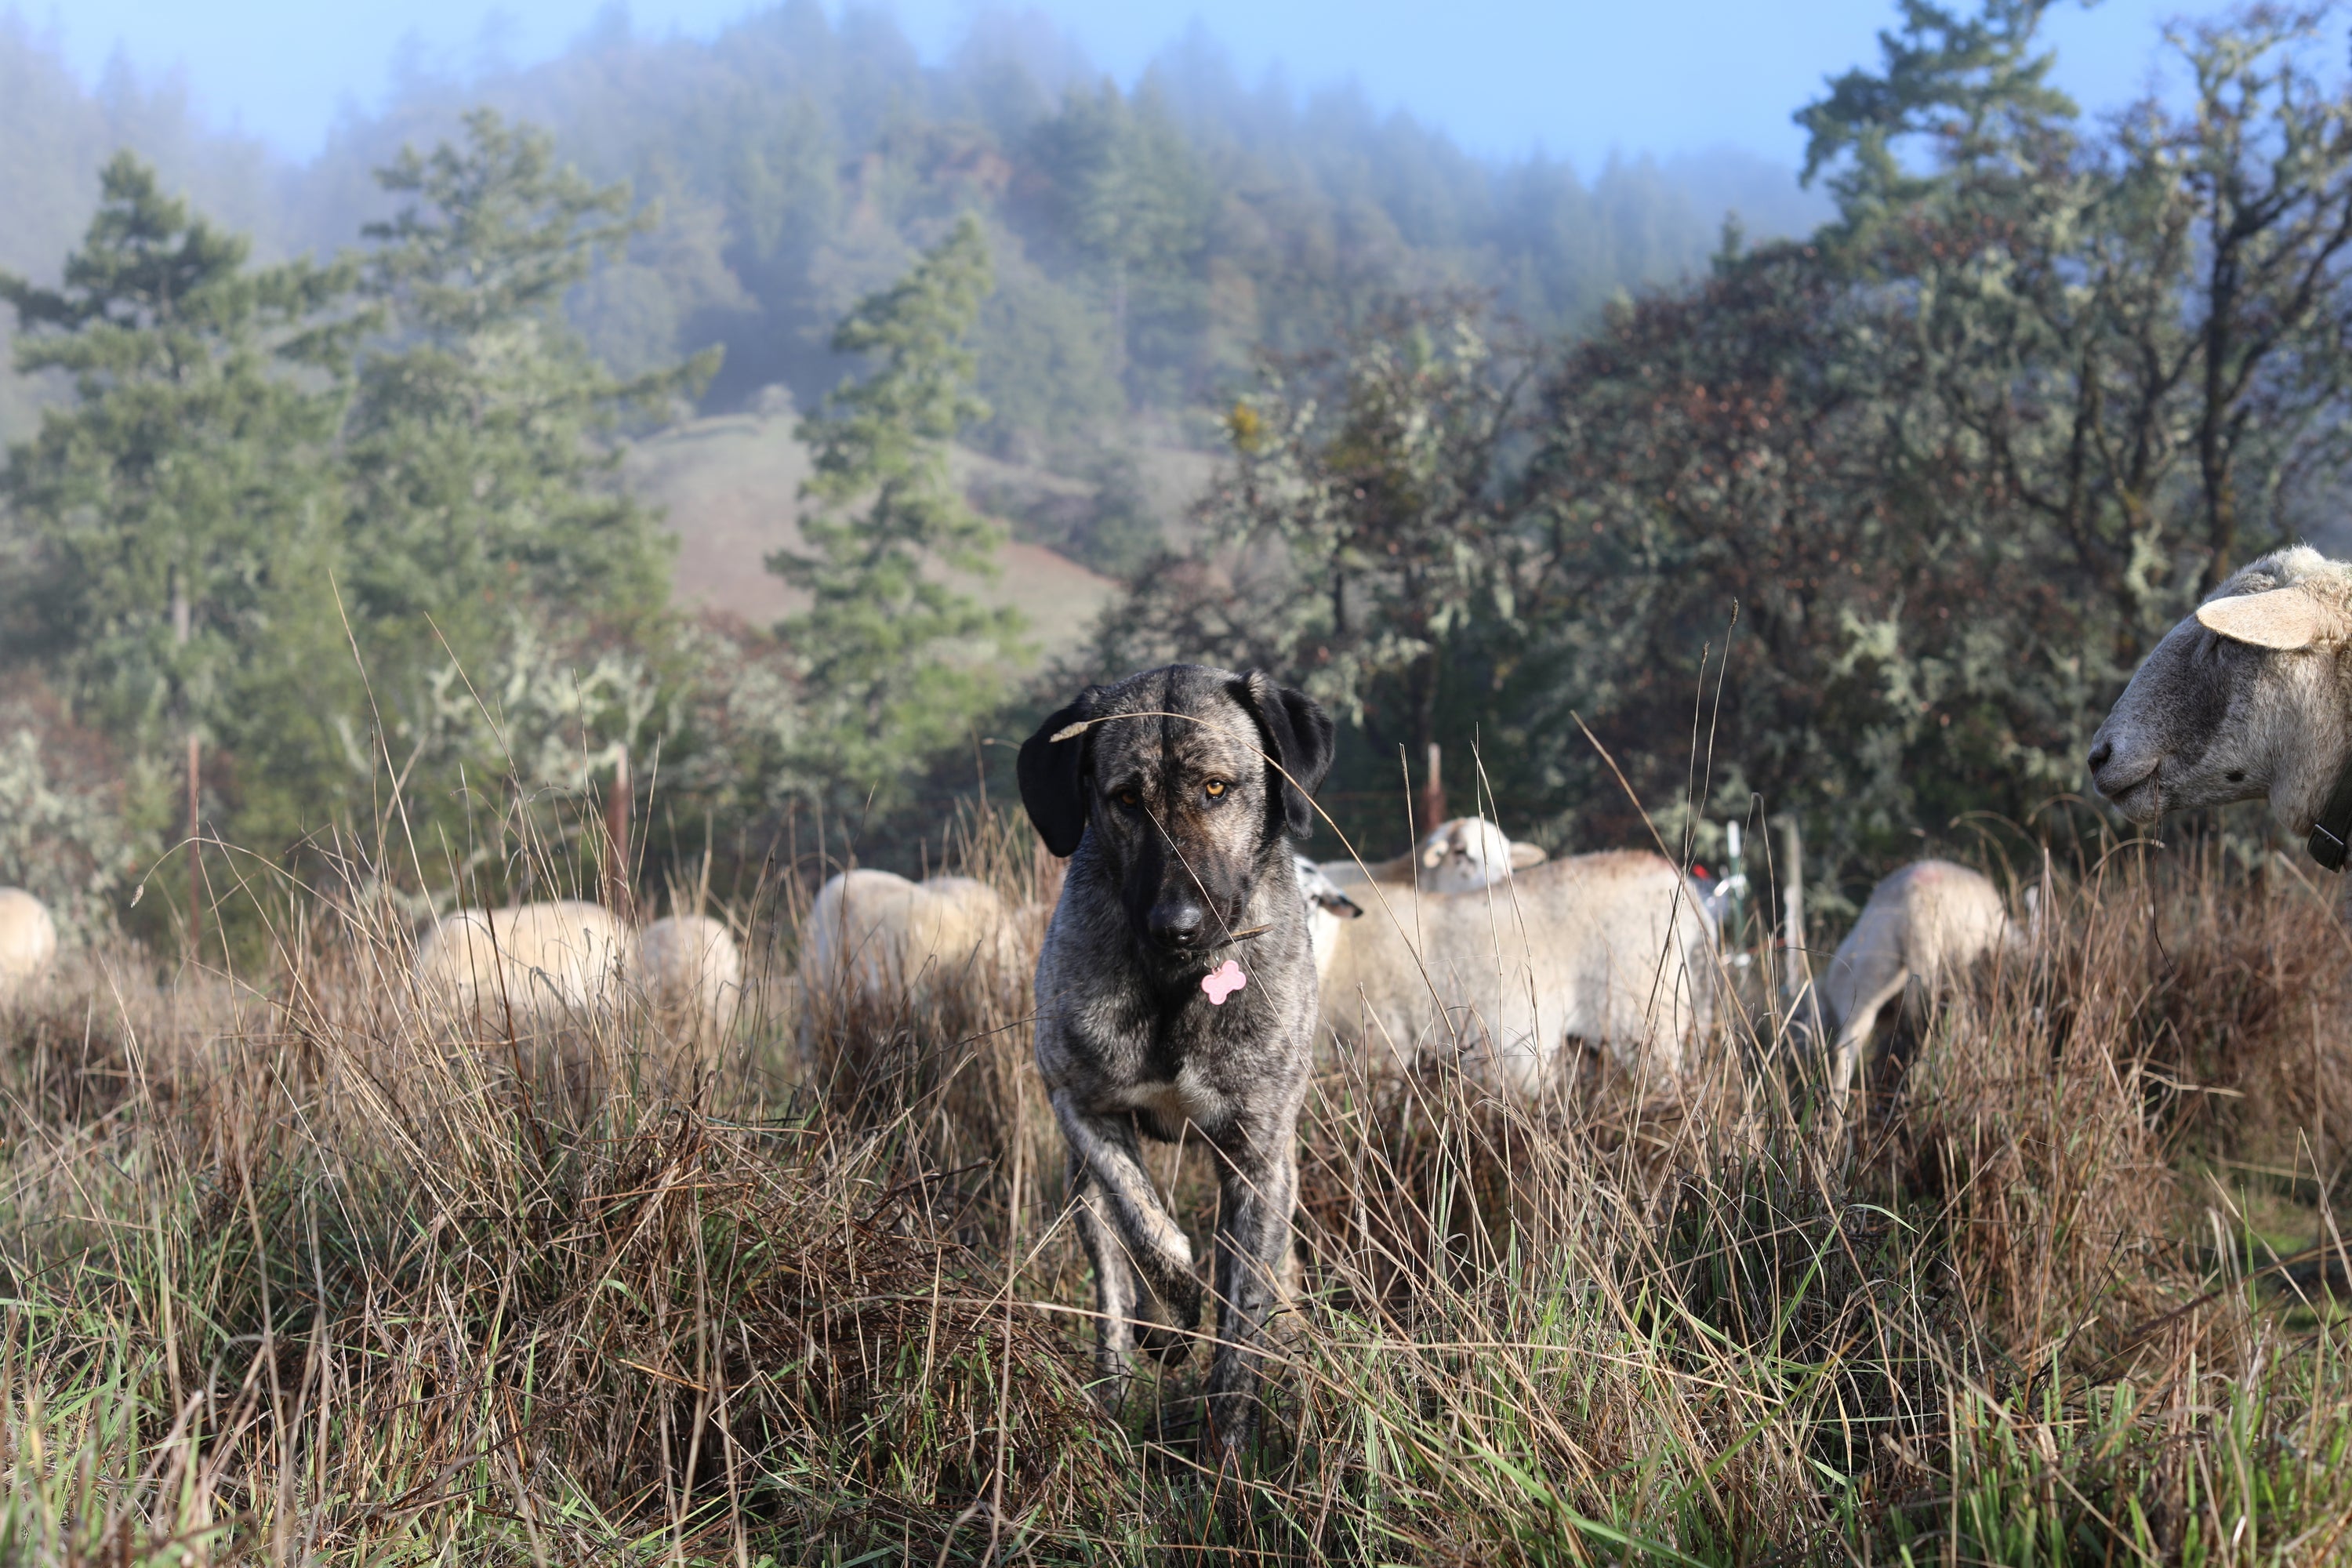 Livestock guardian dog, Zorah, hanging out with her sheep.